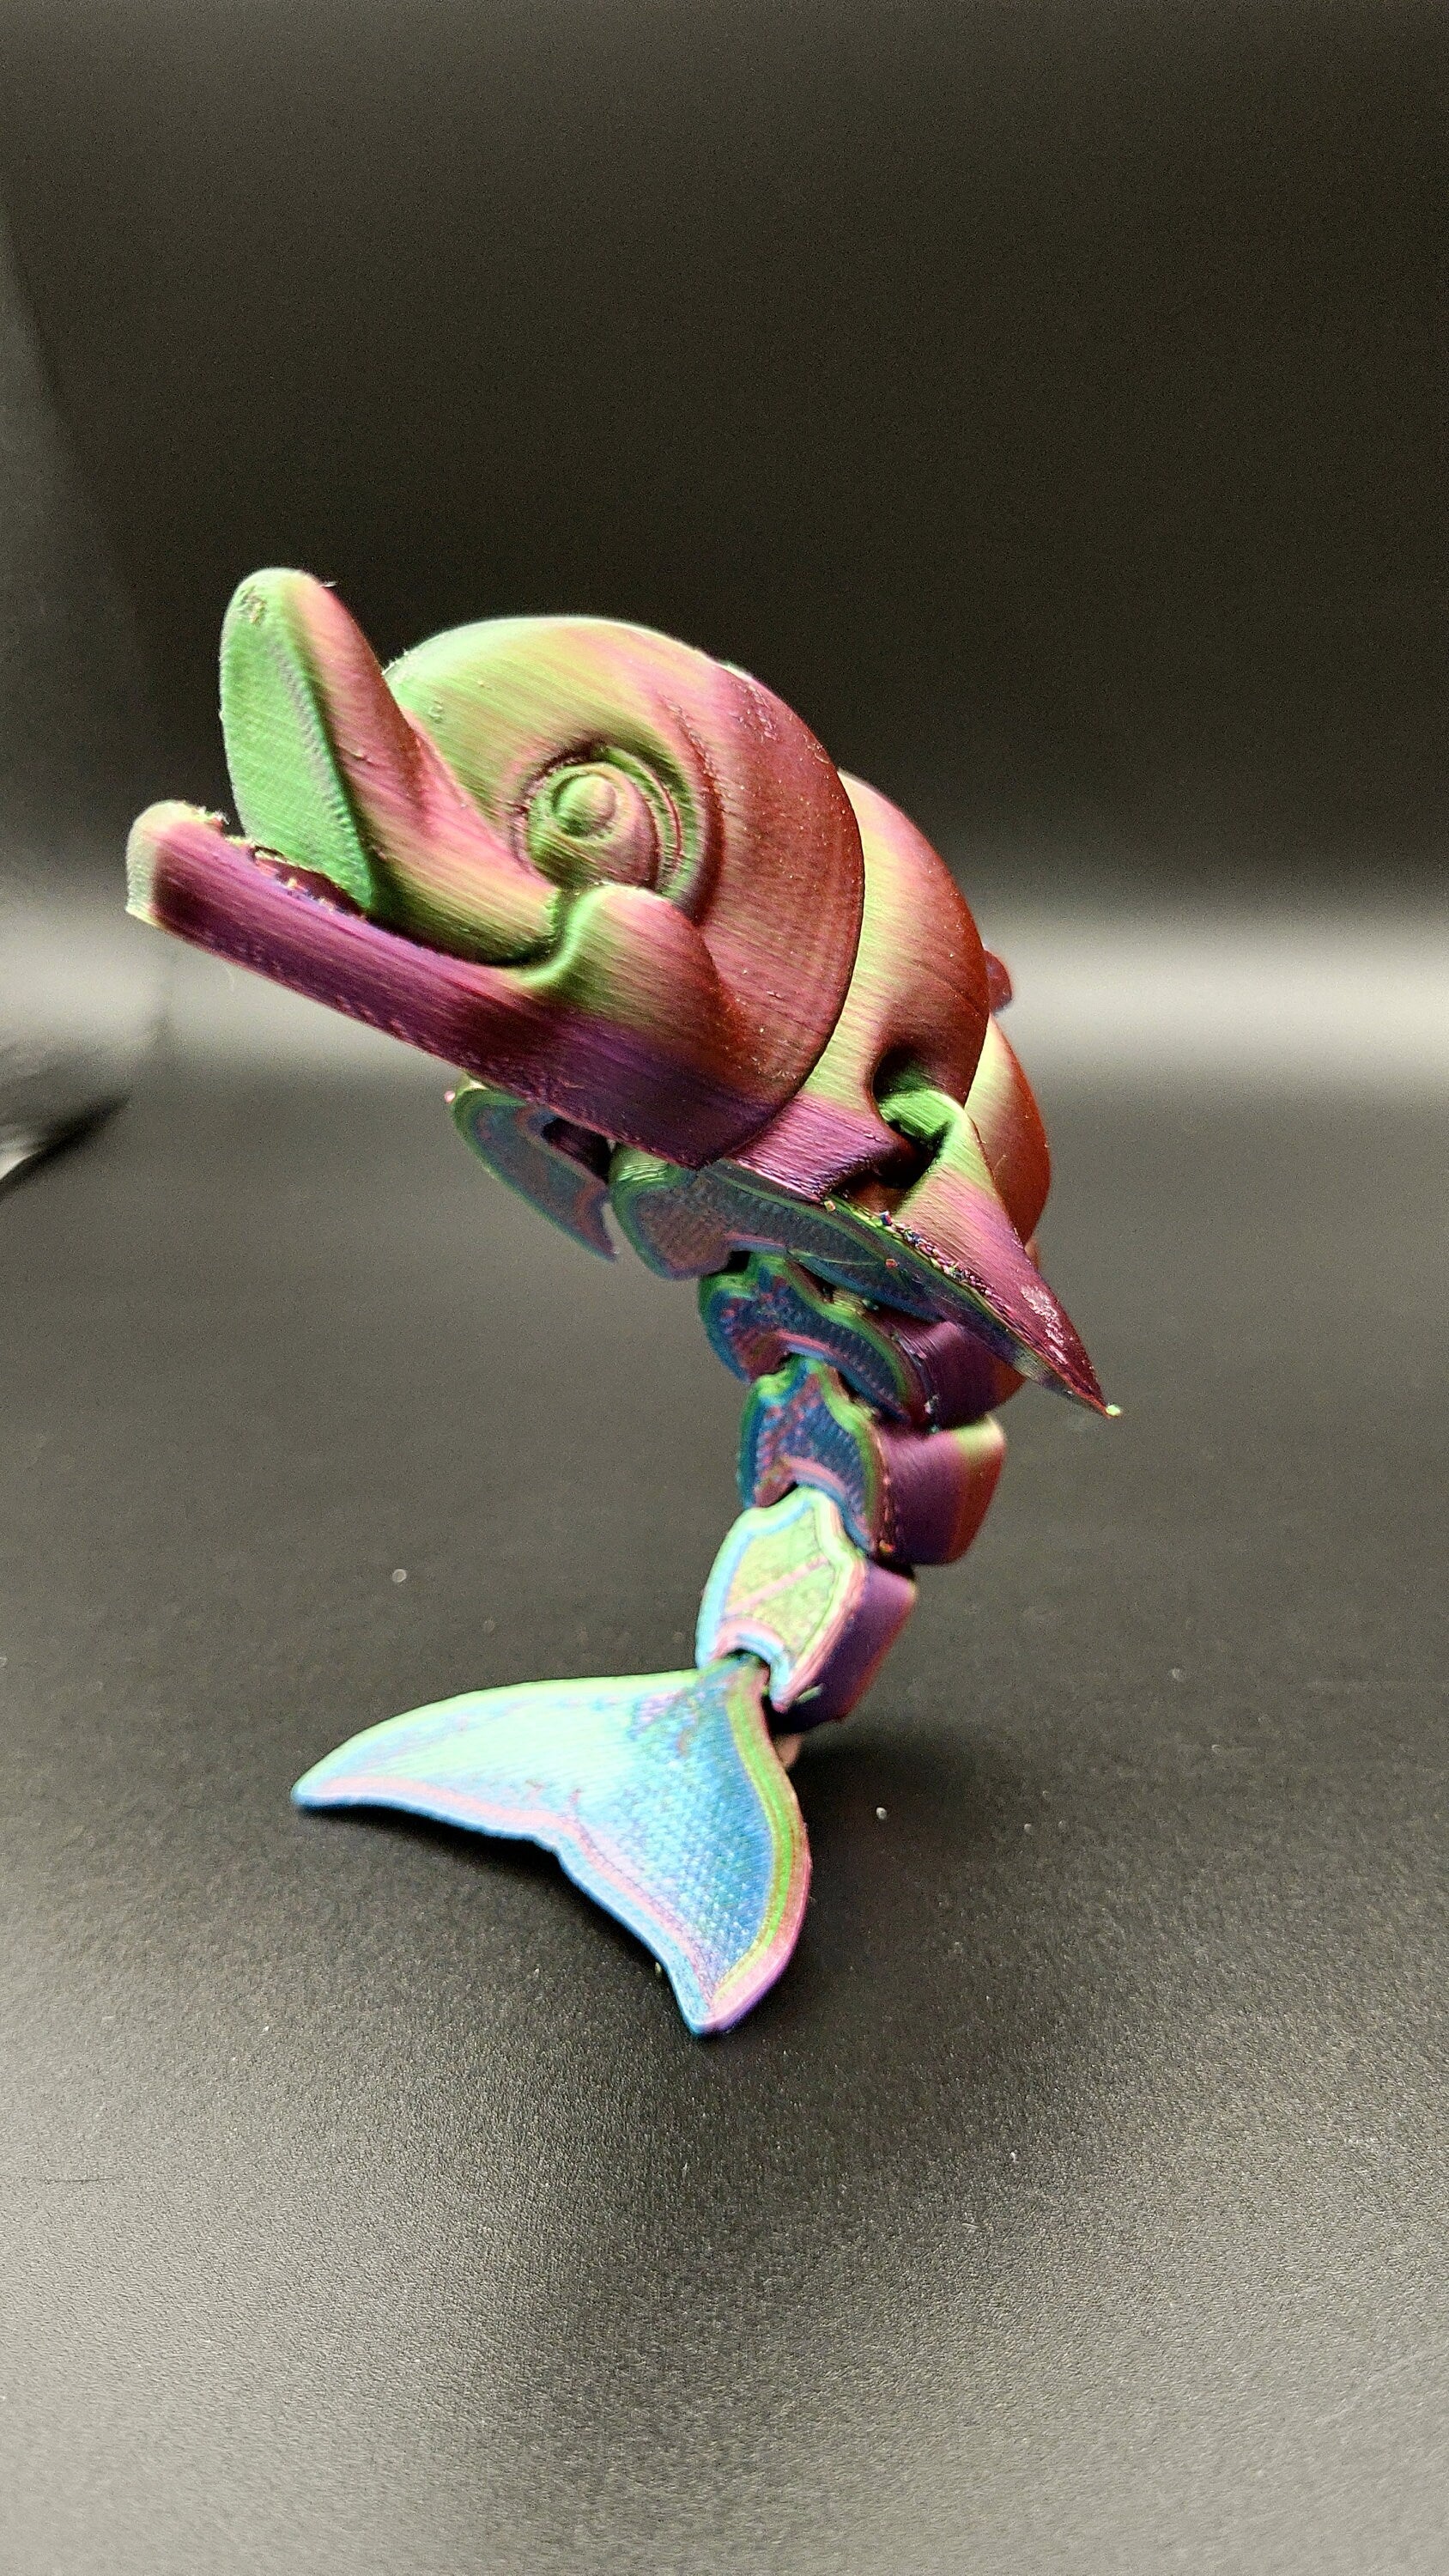 Tri Color Flexi Dolphin. Articulating Super Cute Dolphin. Great fidget toy. Desk buddy. Sensory toy. No surprise rainbow dolphin.